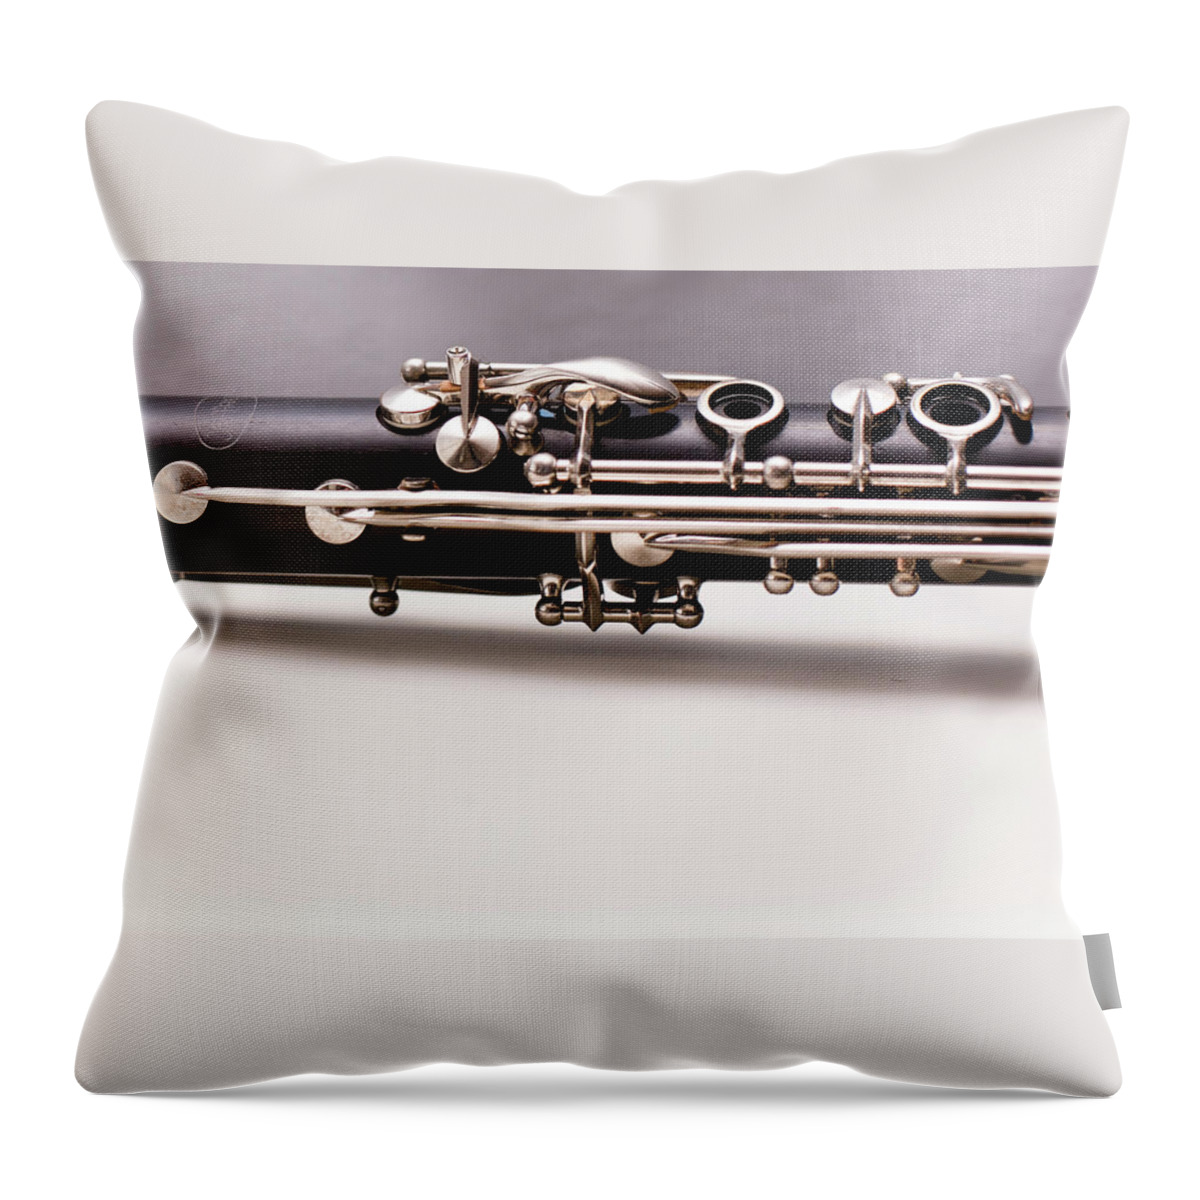 Clarinet Throw Pillow featuring the photograph Upper-middle Portion Of A B Flat by Jennifer M. Ramos